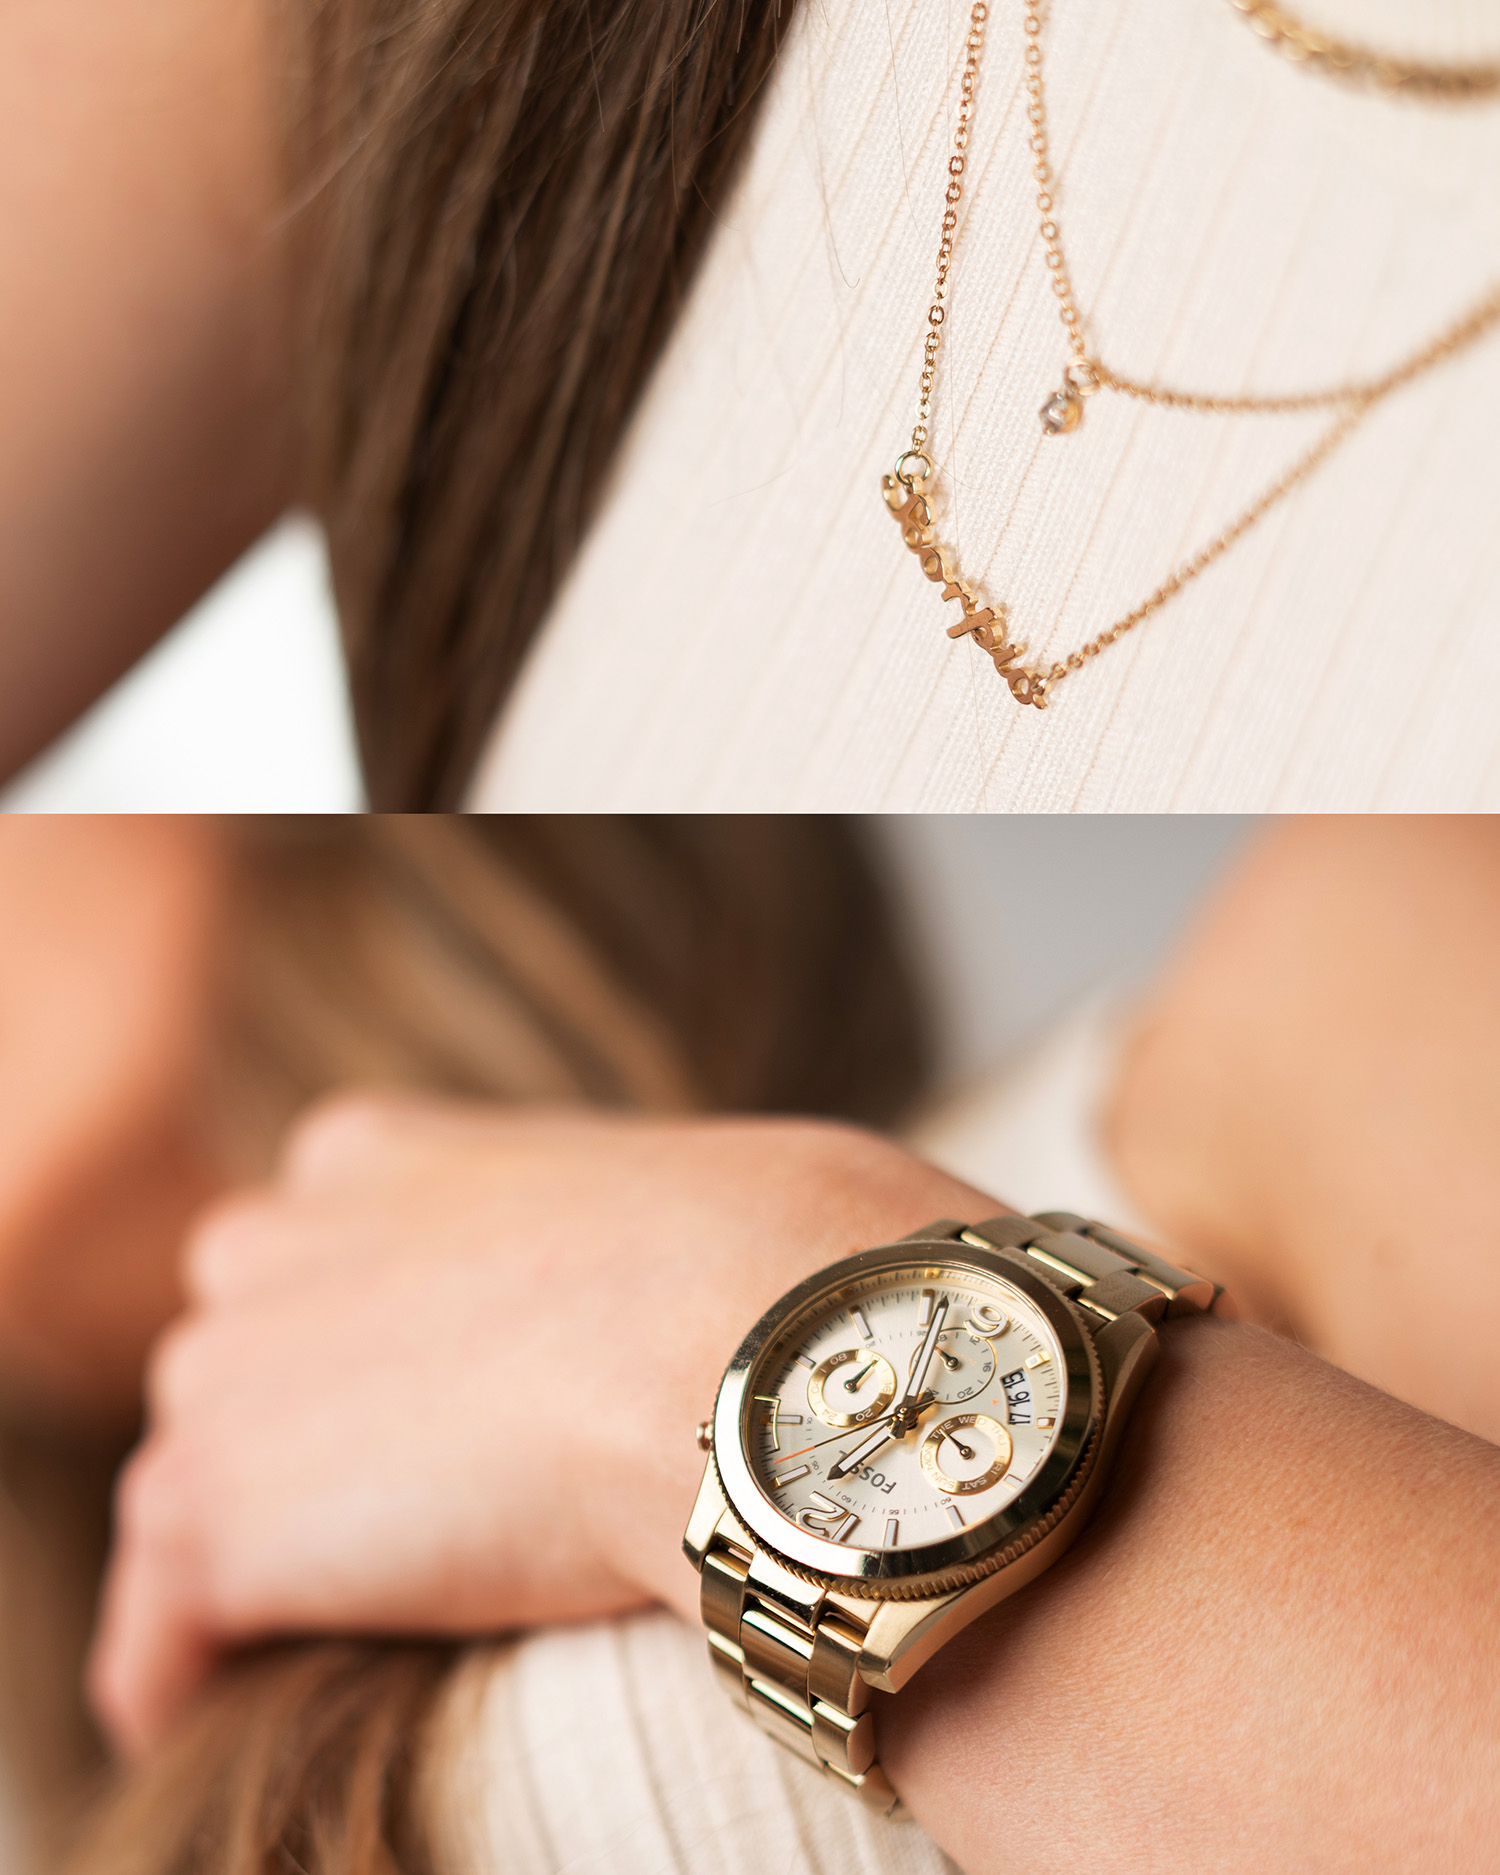 Product Jewelry Brand Photography